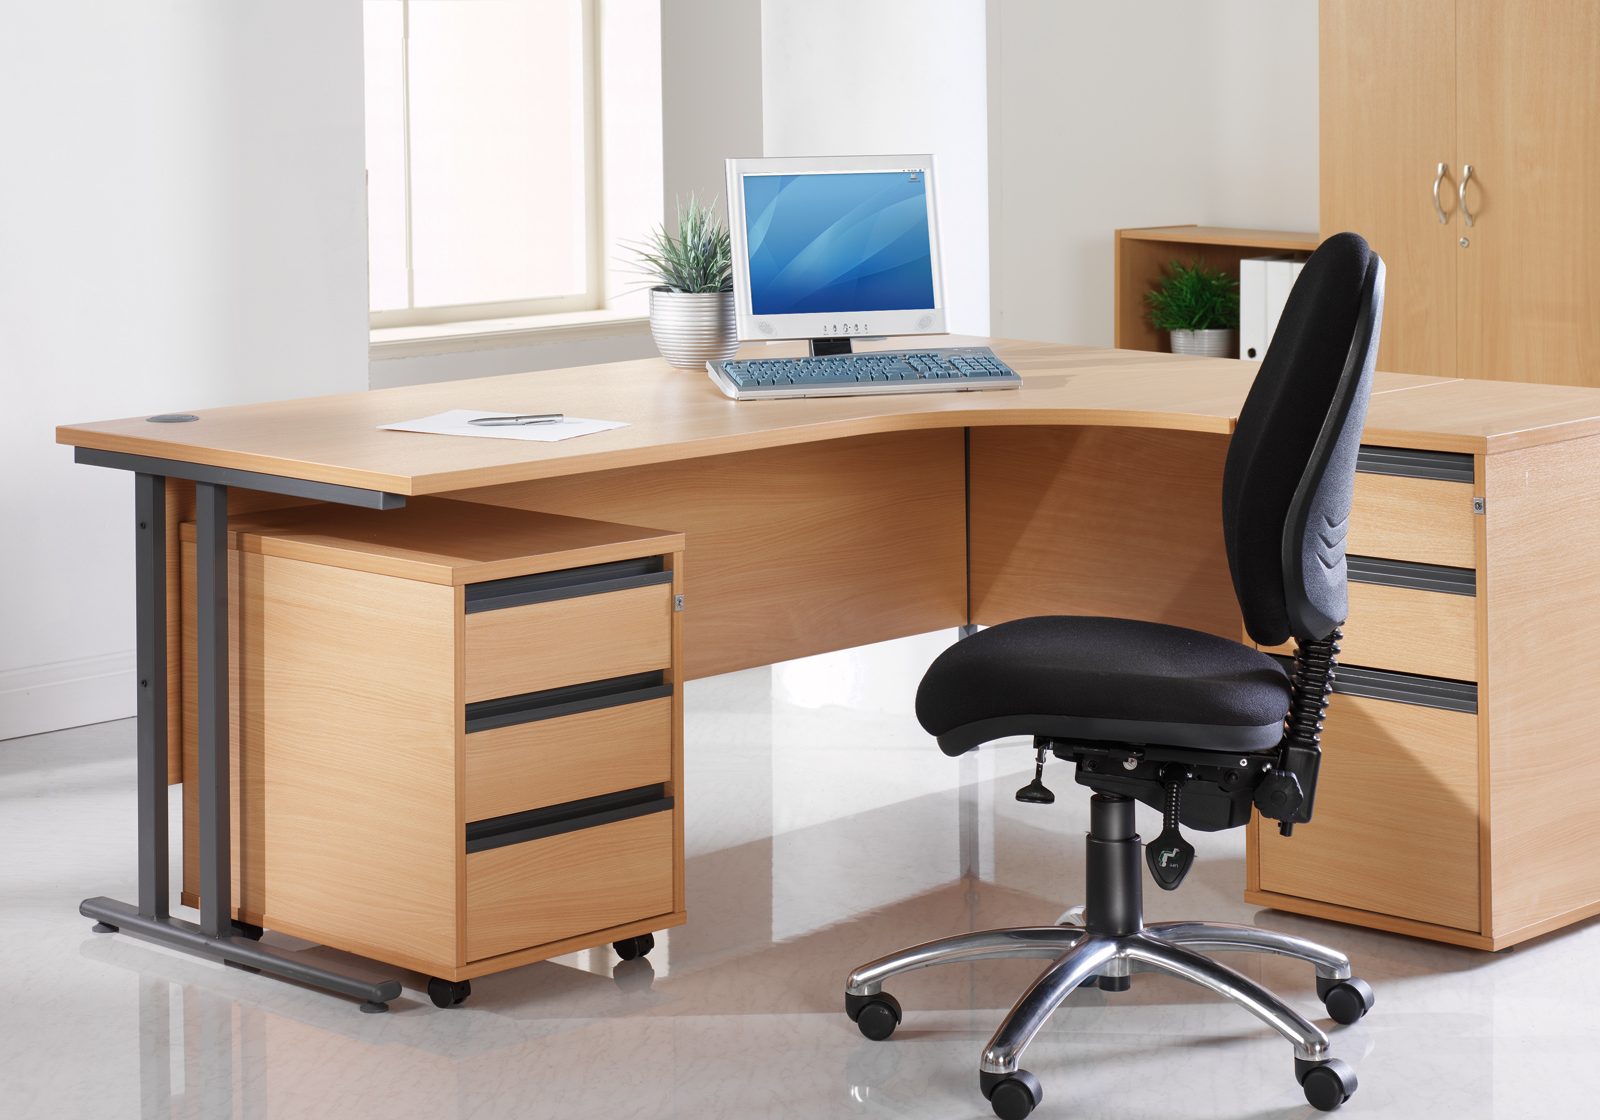 Desk with computer on it and a black swivel chair